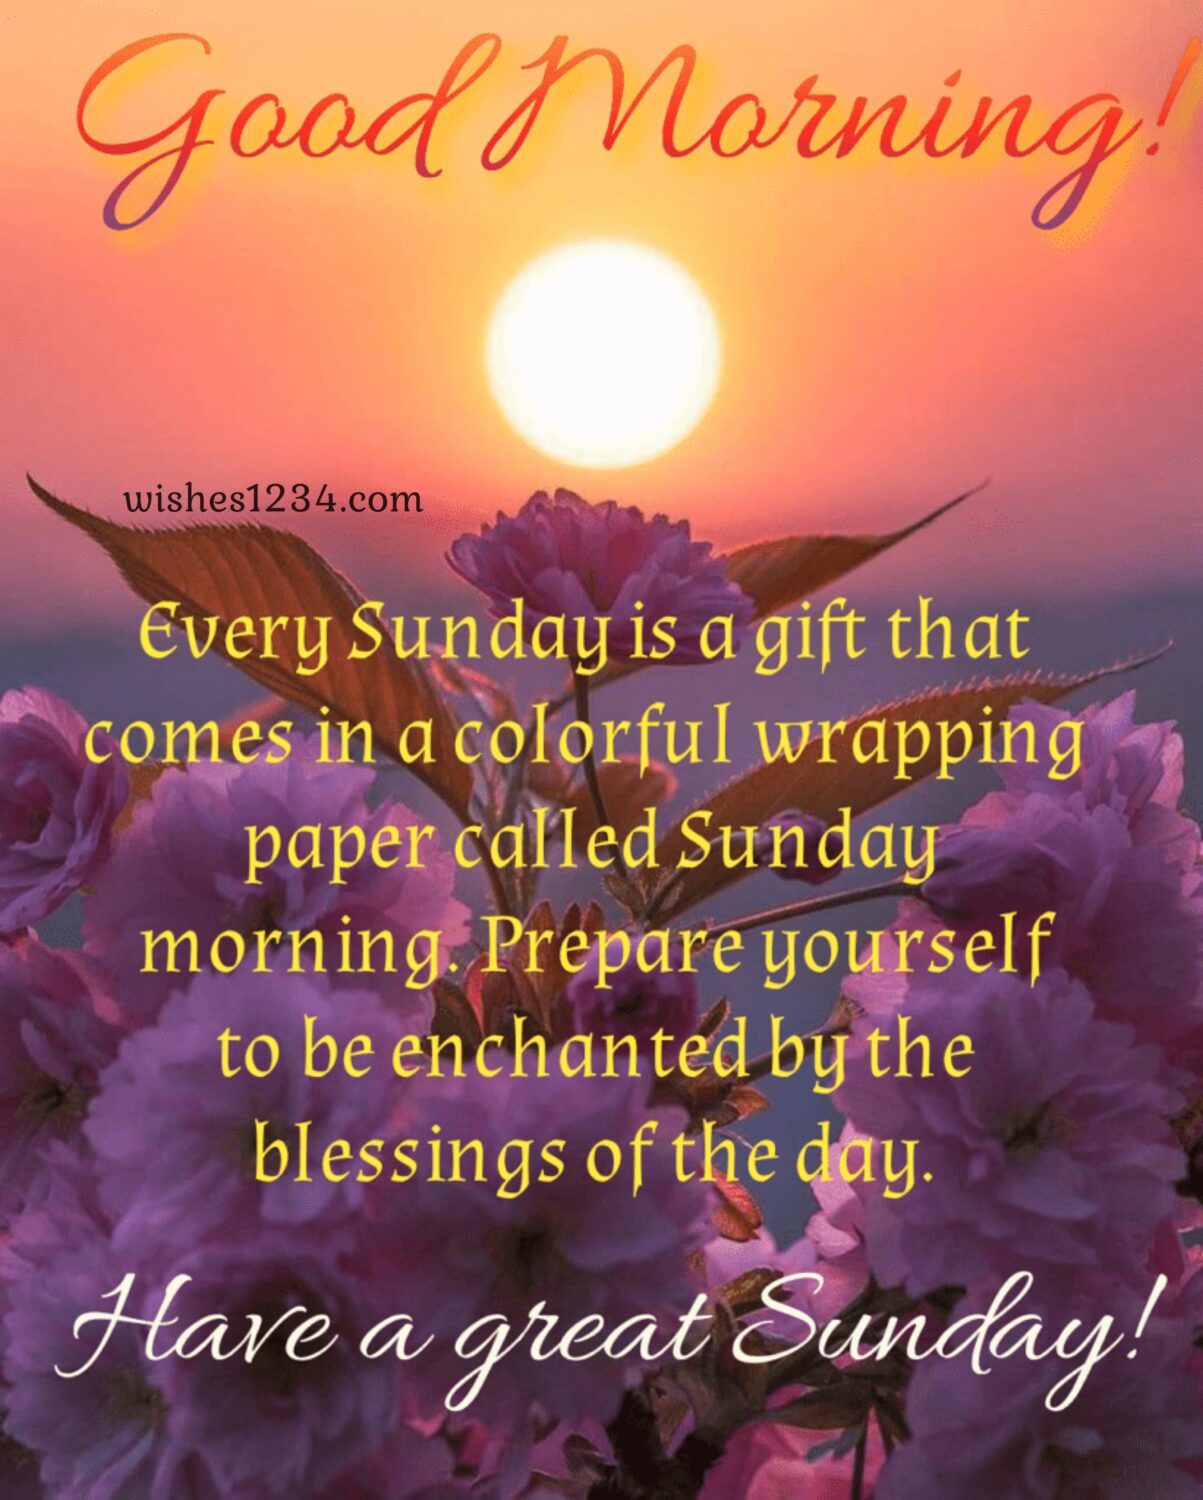 Flowers with sun rising, Sunday blessings, Cup of Latte coffee, Sunday Quotes image, Good Morning Sunday blessings.